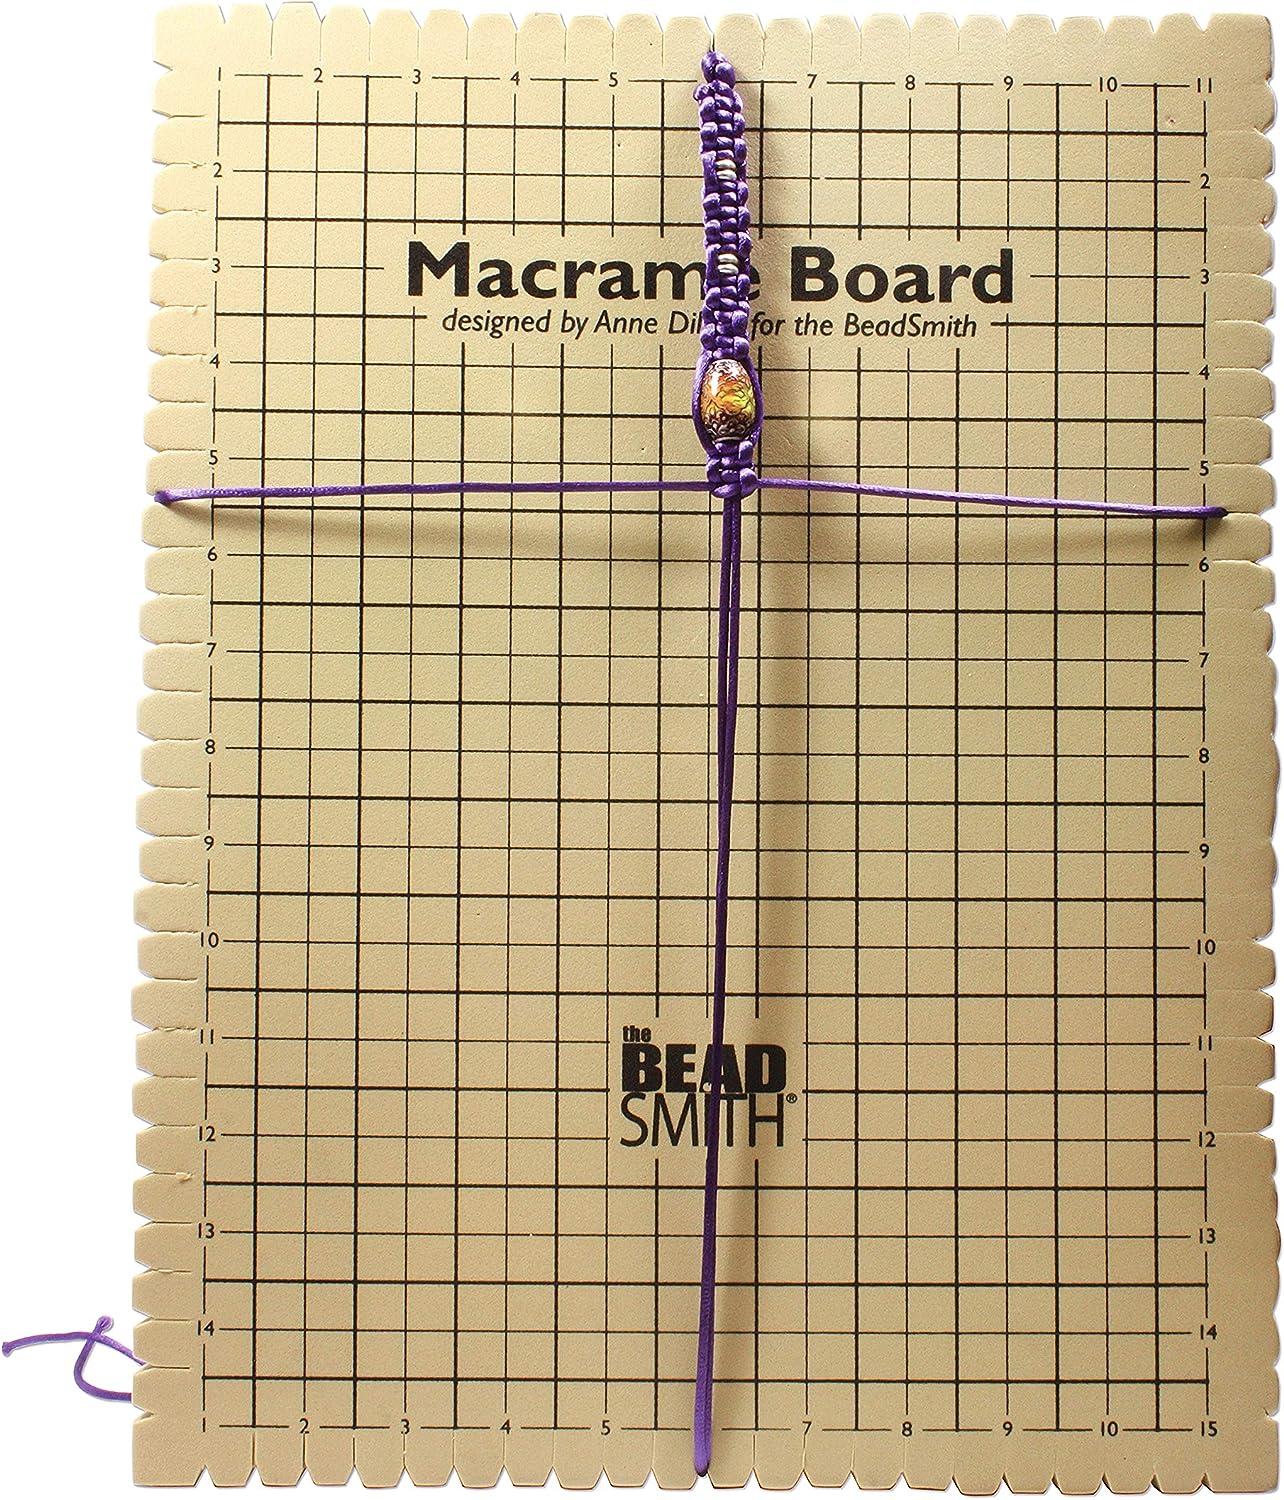 The Beadsmith Mini Macrame Board, 7.5 x 10.5 Inches, 0.5 inch Thick Foam, 6 x 9 inch Grid for Measuring, Bracelet Project with Instructions Included